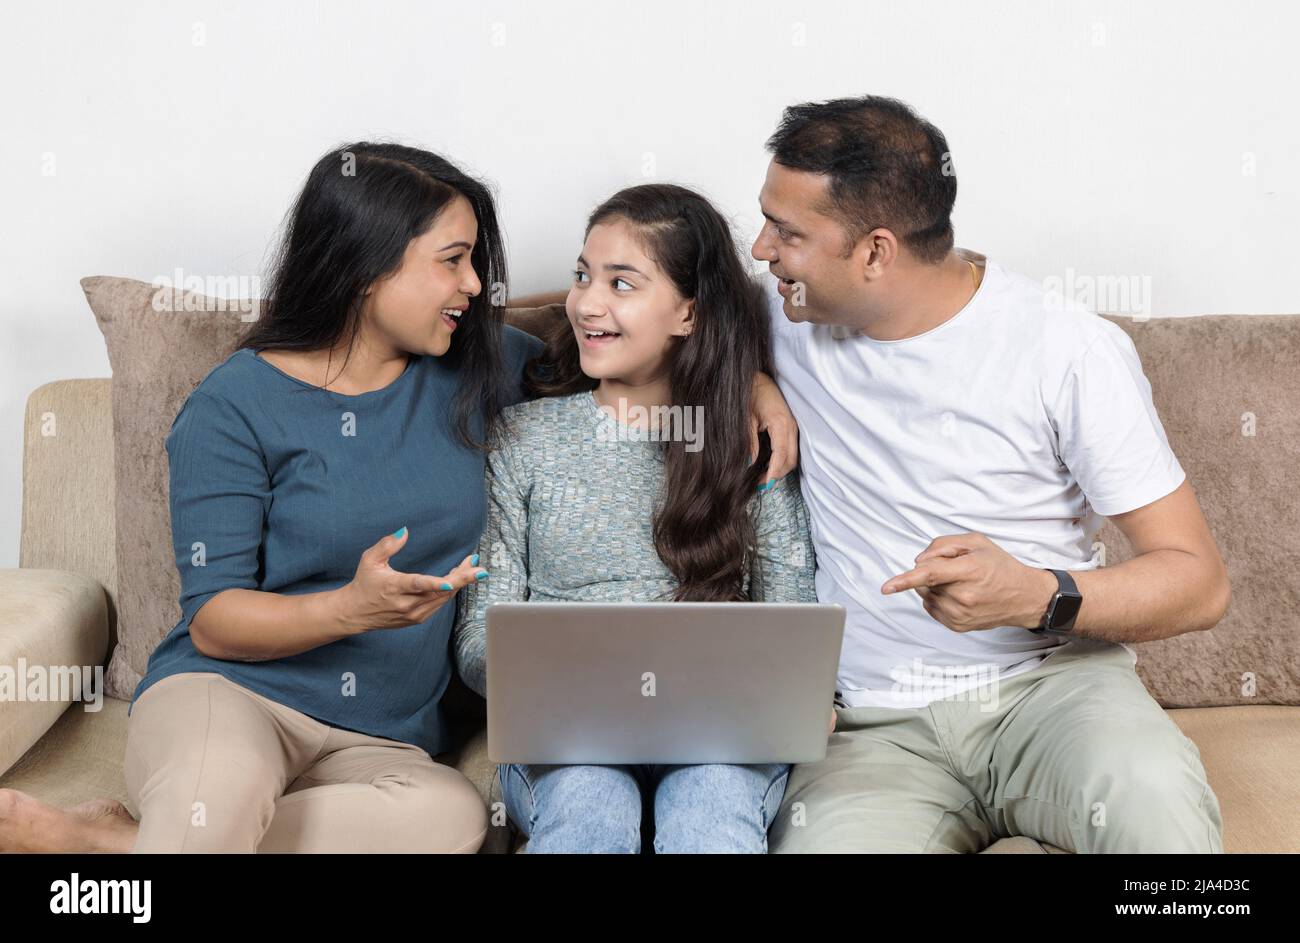 parents with daughter celebrating together Stock Photo